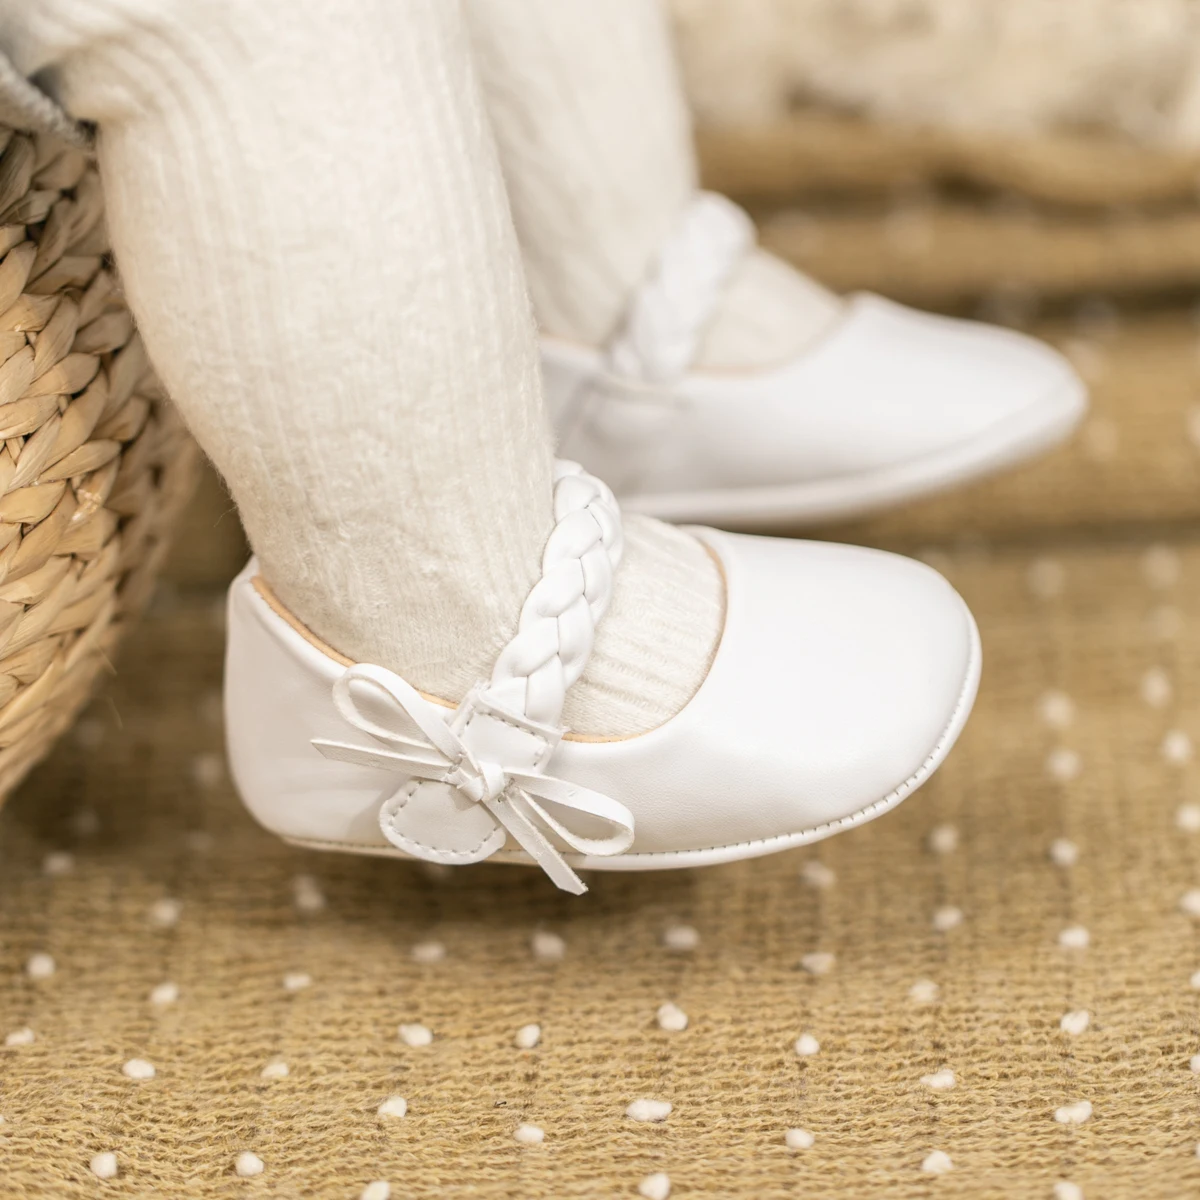 New Arrival Fashional Infant Outdoor Princess Bowknot Wedding Rubber Soft Sole PU Leather Baby Girl shoes